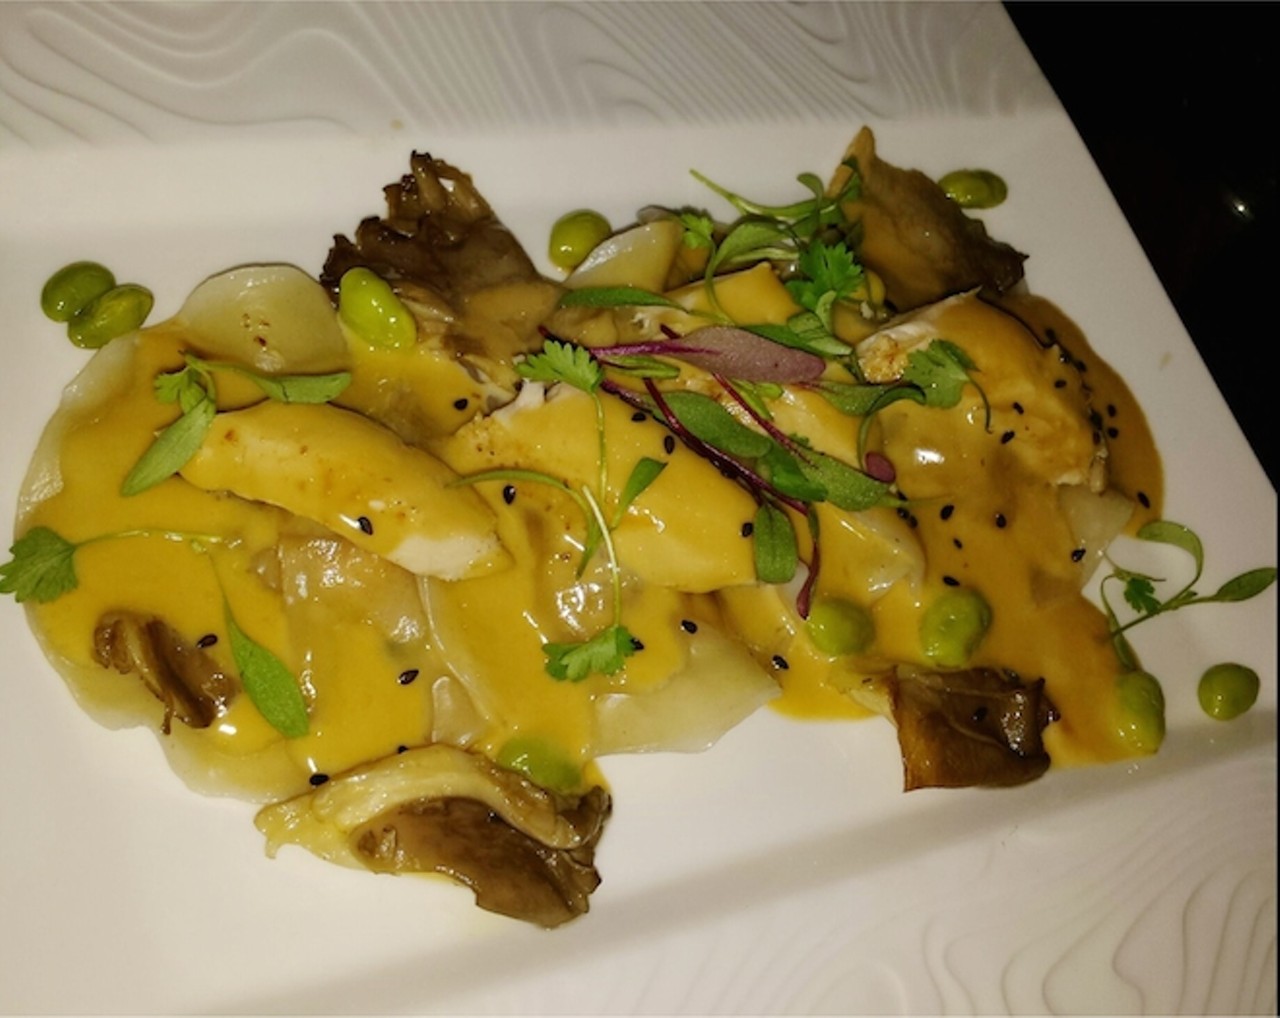 Soco-Style "Chicken and Dumplings"
(Carved Chicken Breast, Lobster Dumplings, Local Mushrooms, Edamame, Soy Butter)